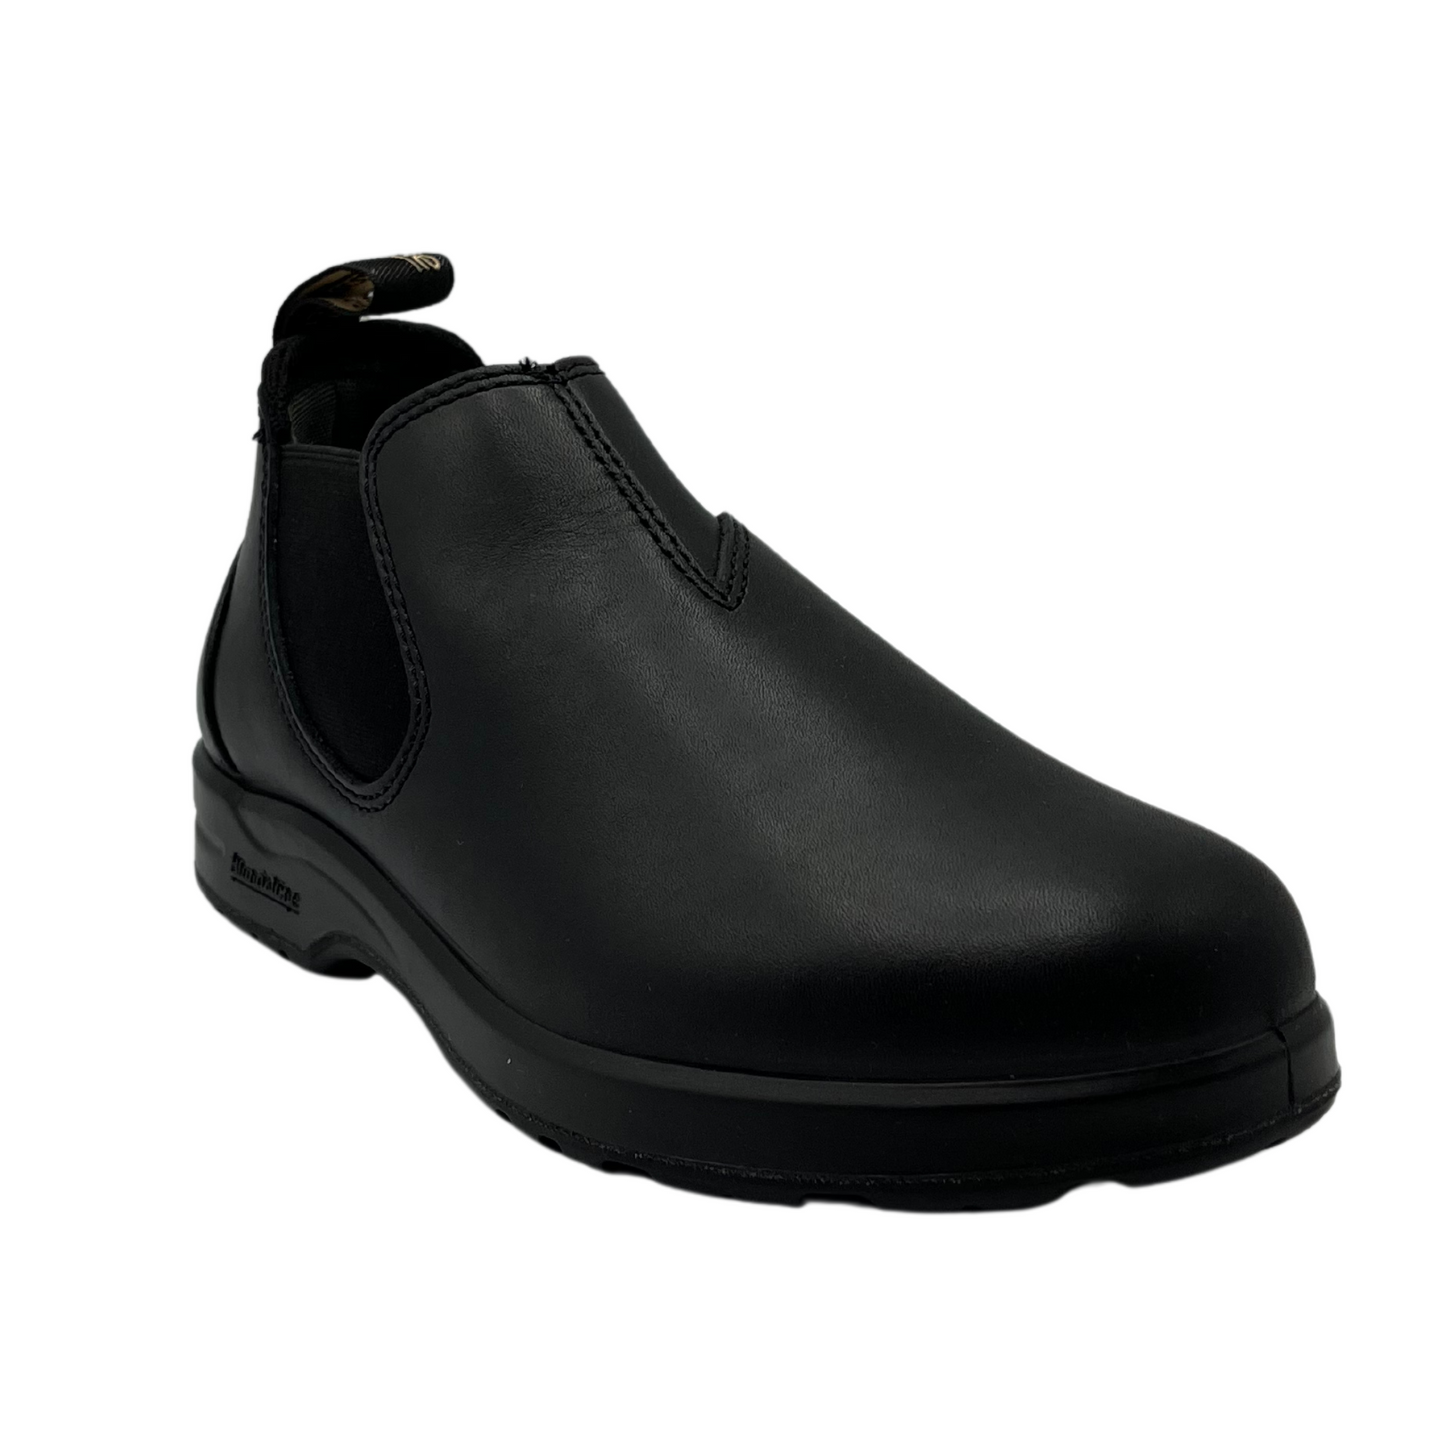 45 degree angled view of black leather ankle boot with elastic side gore and pull on heel tab